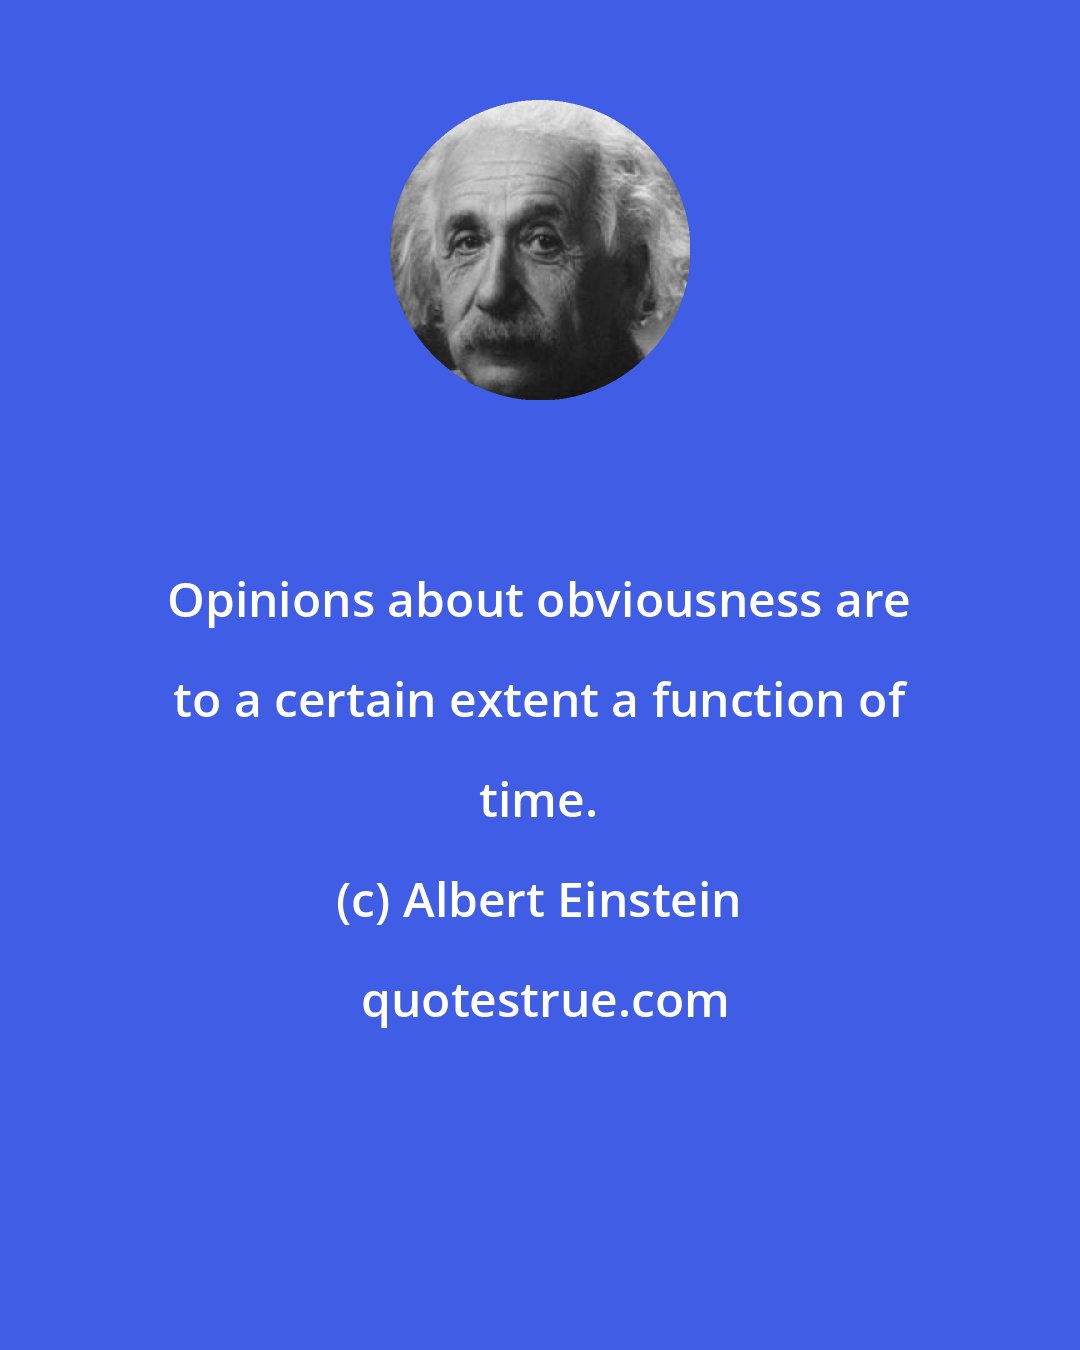 Albert Einstein: Opinions about obviousness are to a certain extent a function of time.